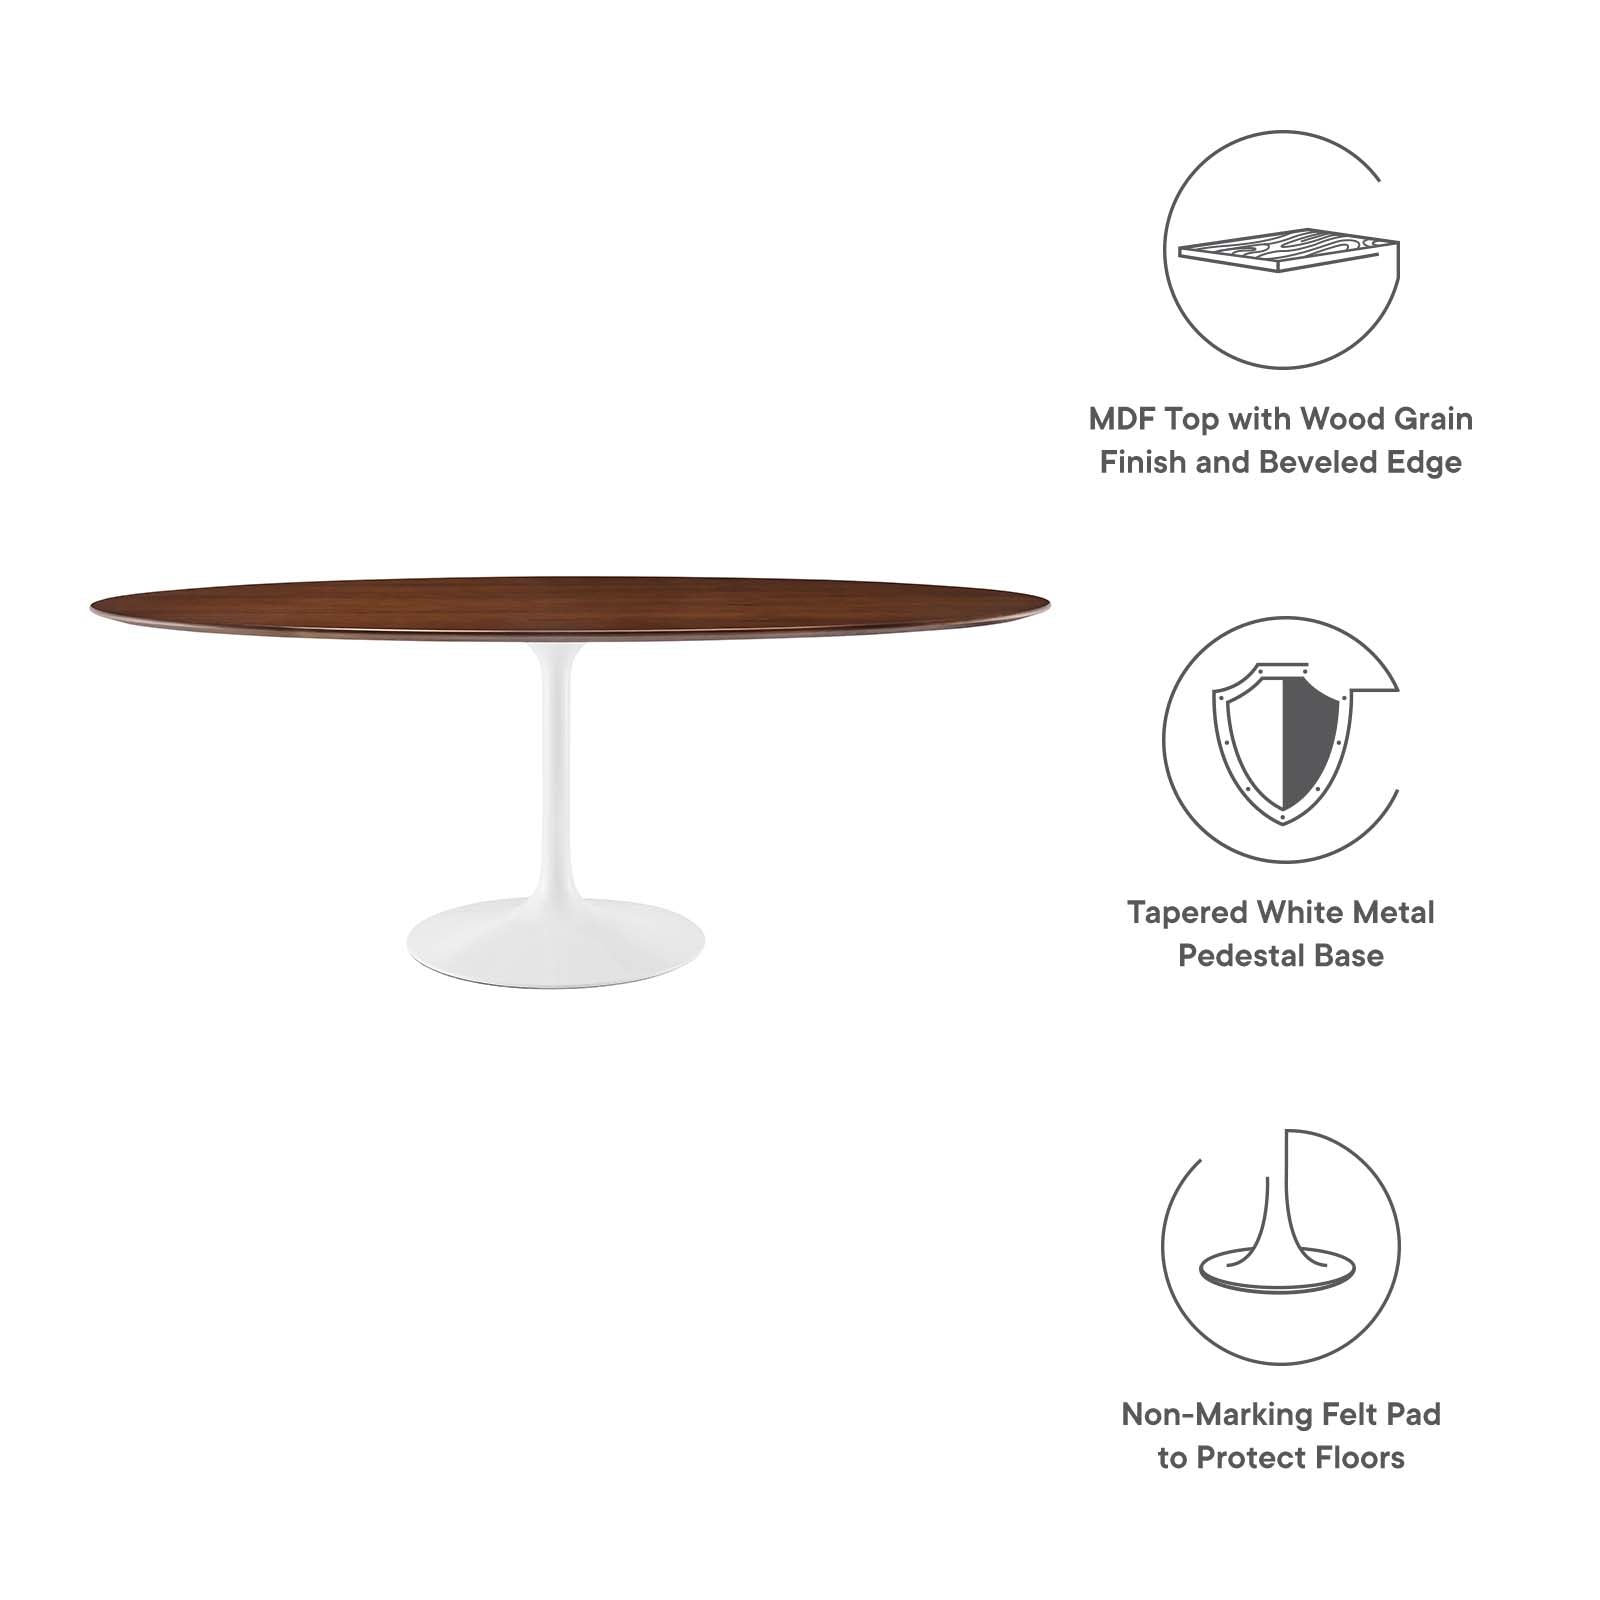 Modway Dining Tables - Lippa 78" Oval Wood Dining Table Walnut